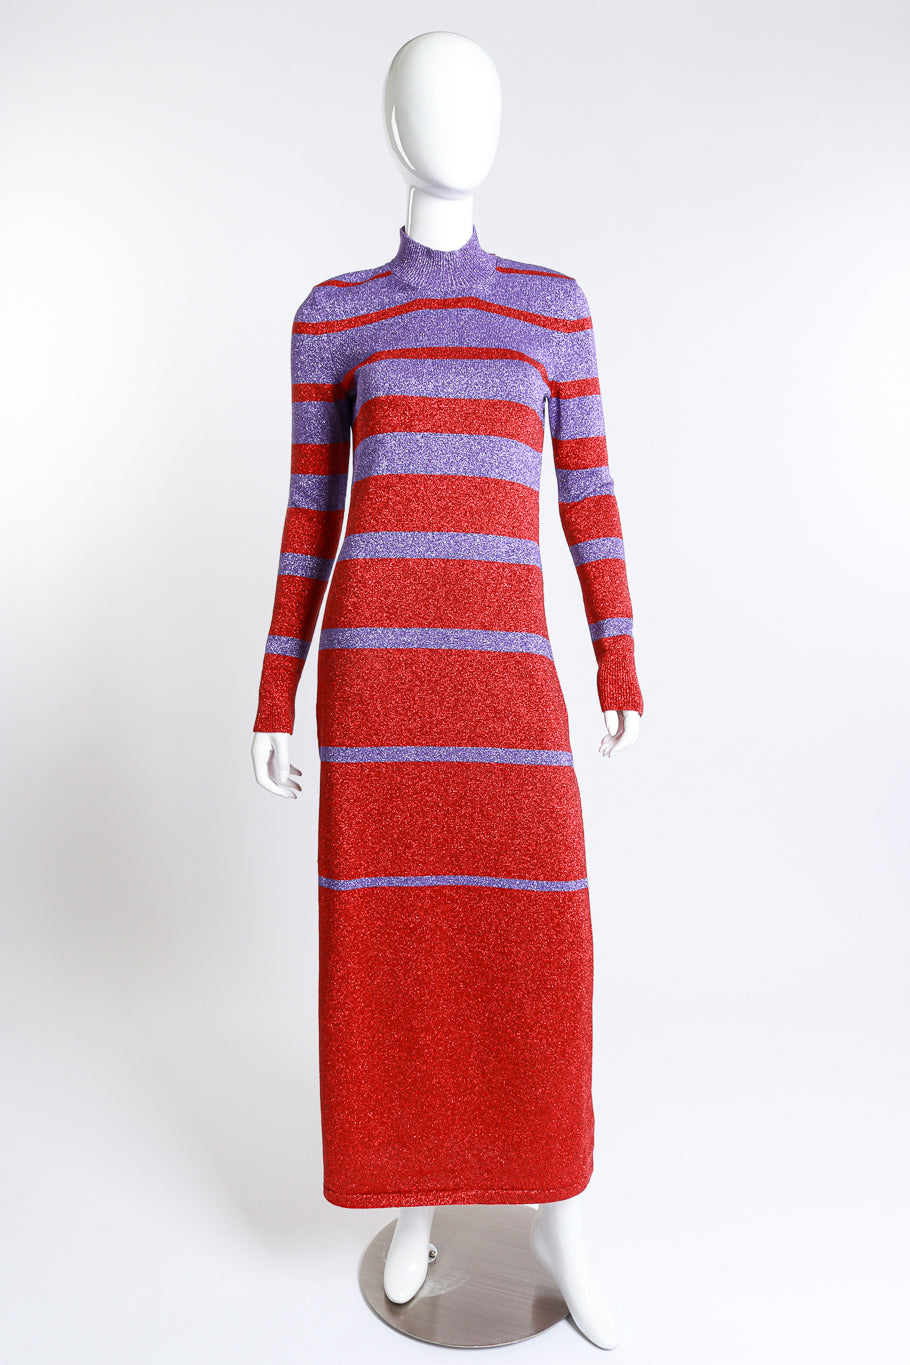 Paco Rabanne Striped Metallic Knit Maxi Dress on mannequin front view at Recess LA